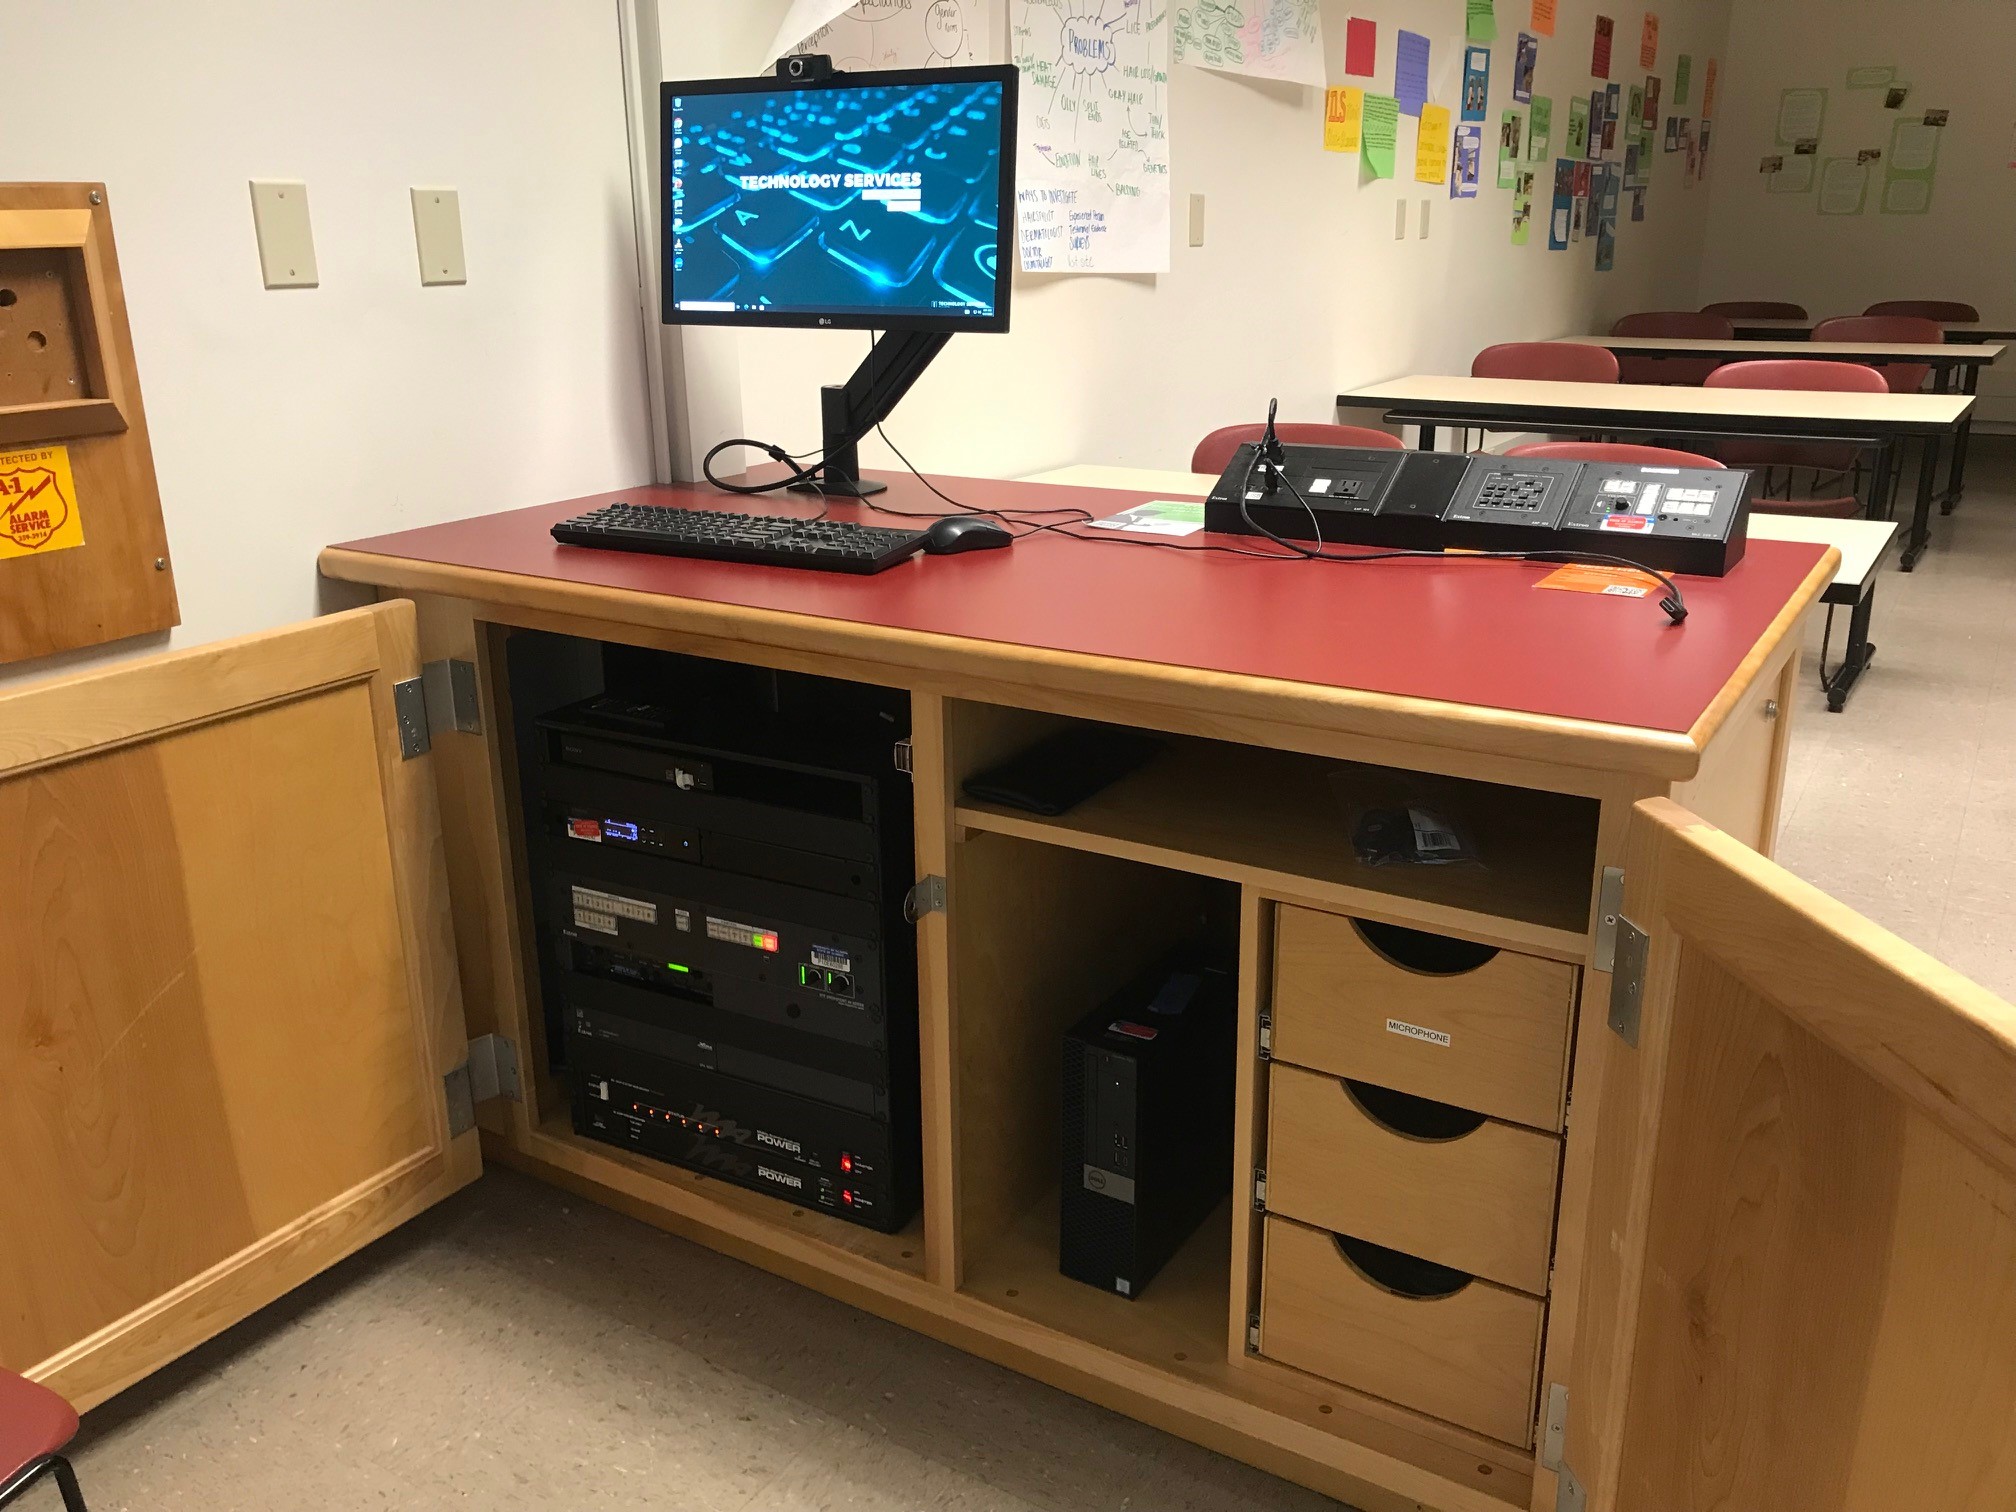 A view of the open cabinet with a computer monitor, resident computer, HDMI input, Blu-ray player, push button controller, and audio visual rack.